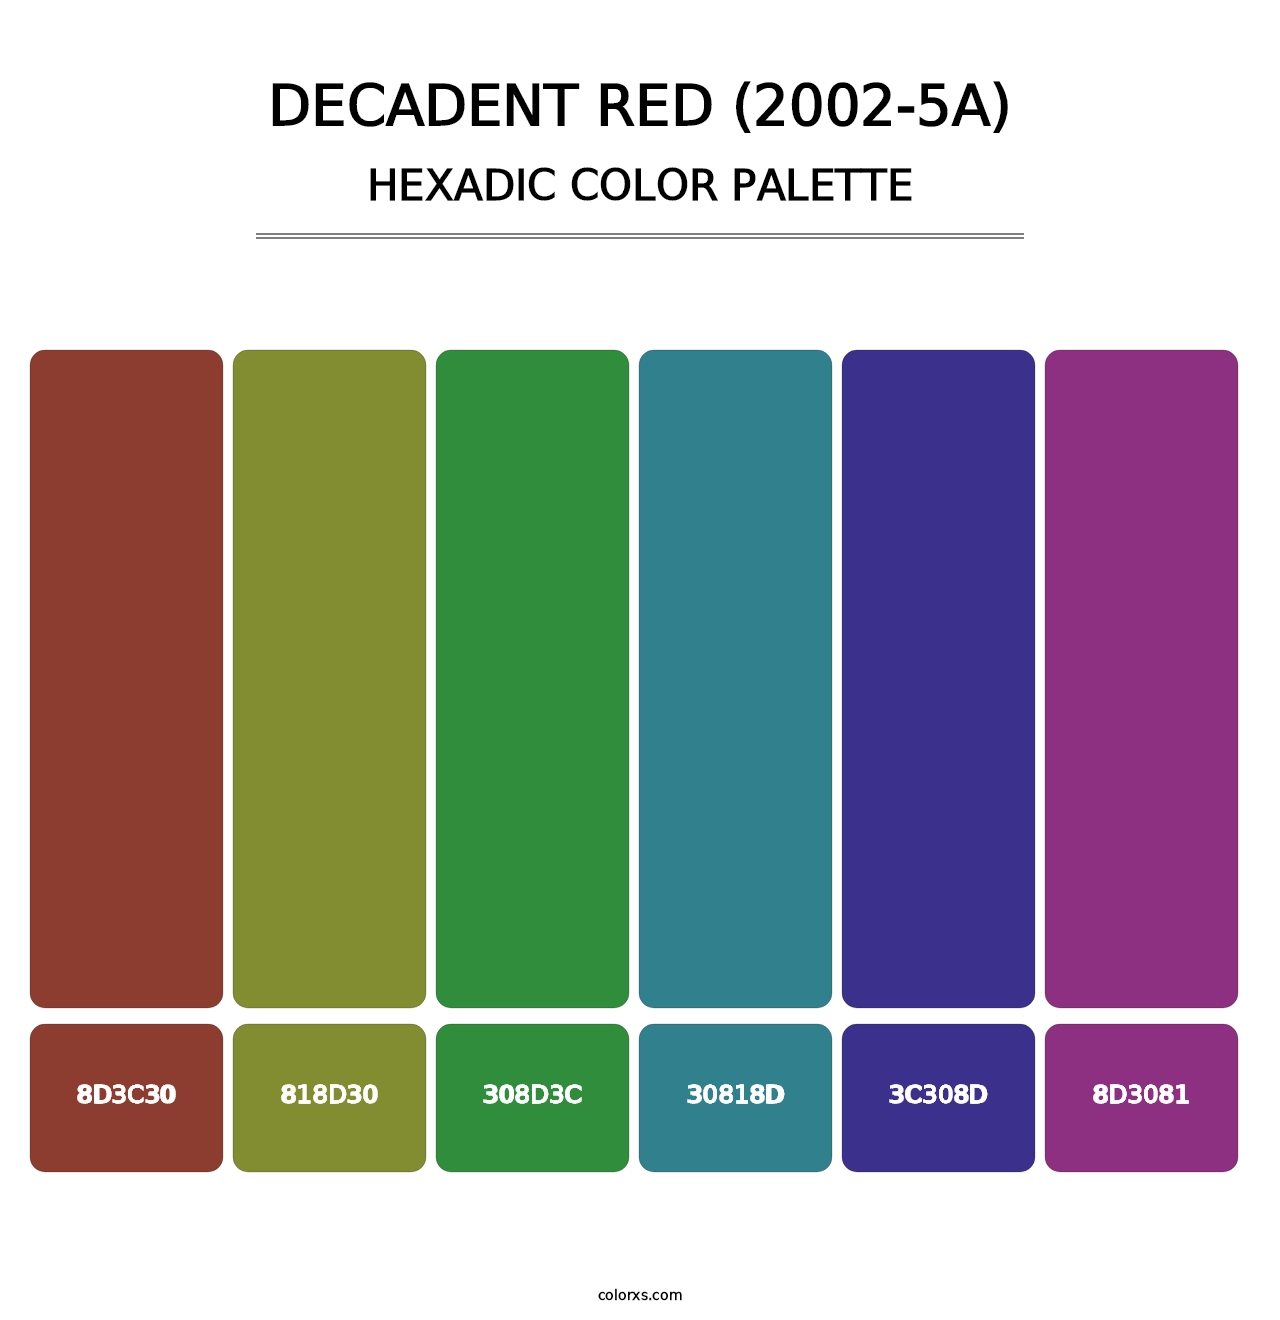 Decadent Red (2002-5A) - Hexadic Color Palette